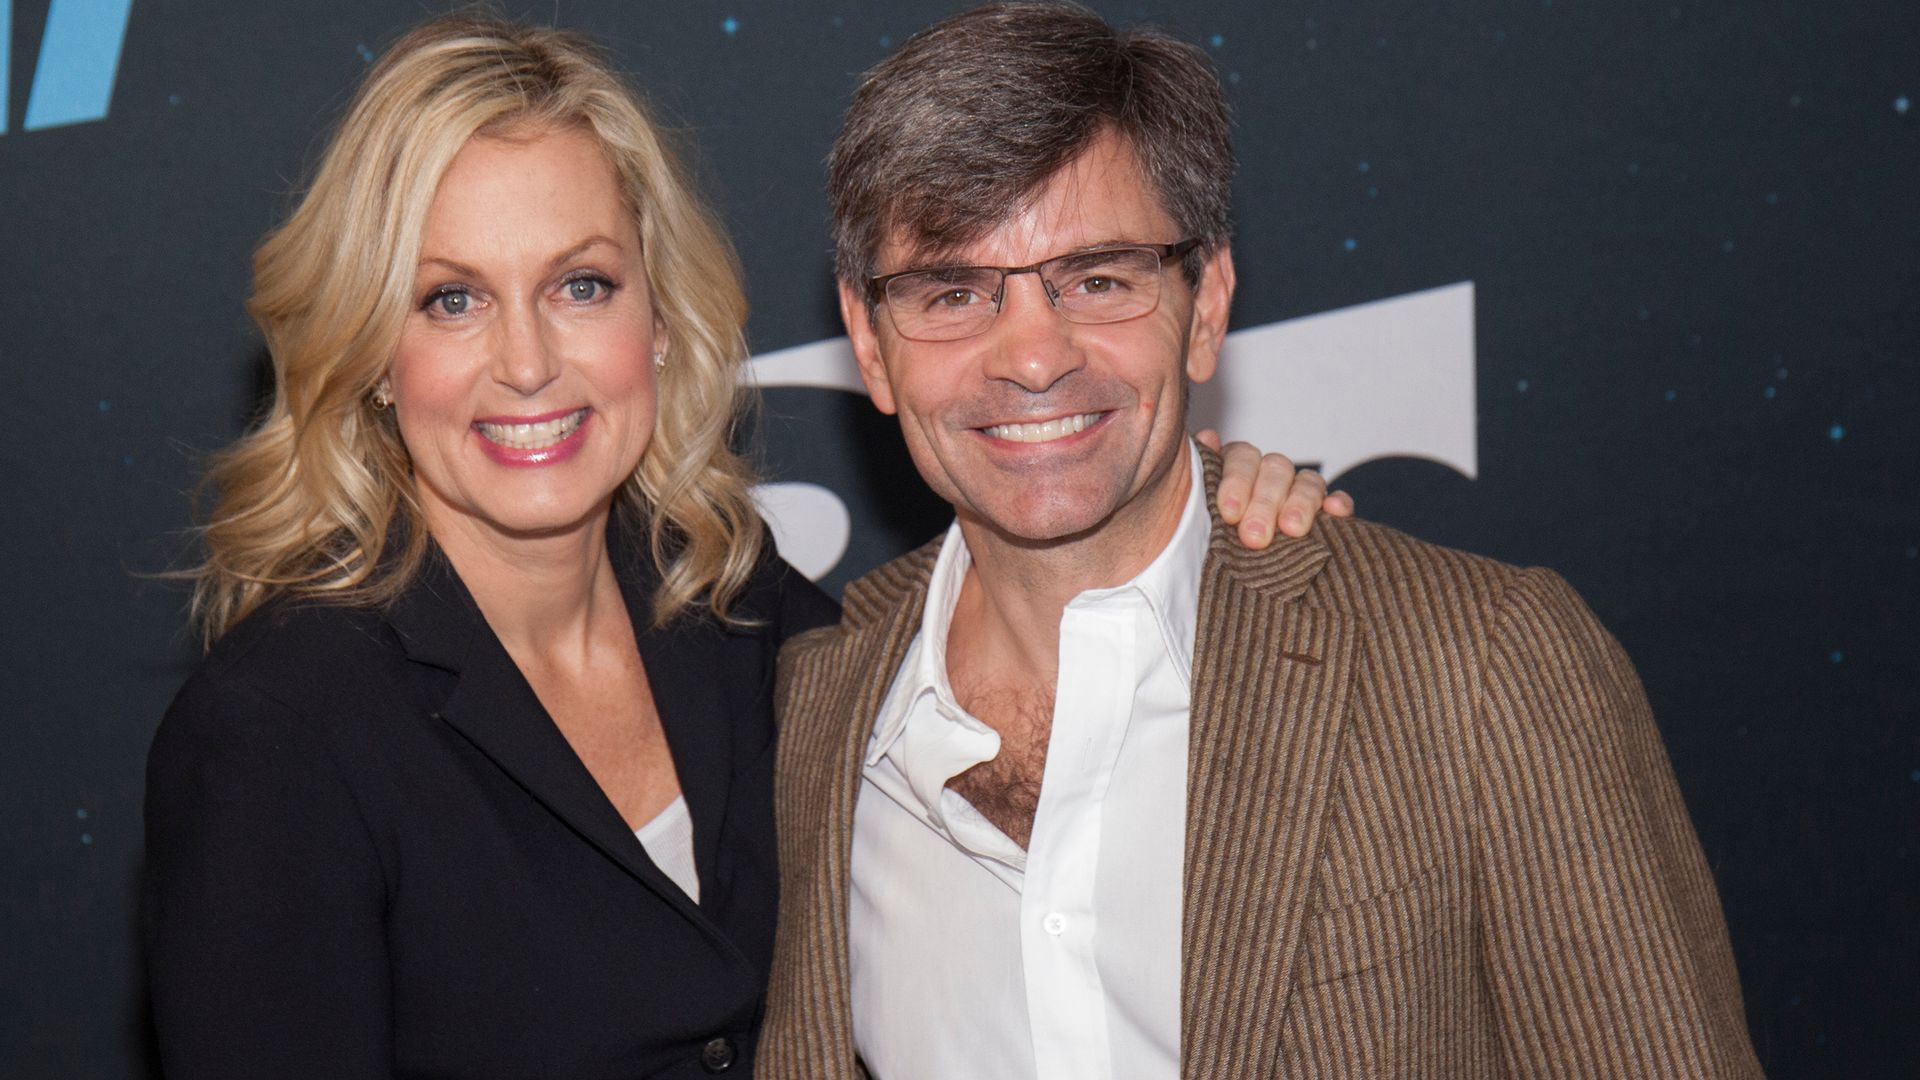 GMA's George Stephanopoulos and Ali Wentworth on the red carpet 